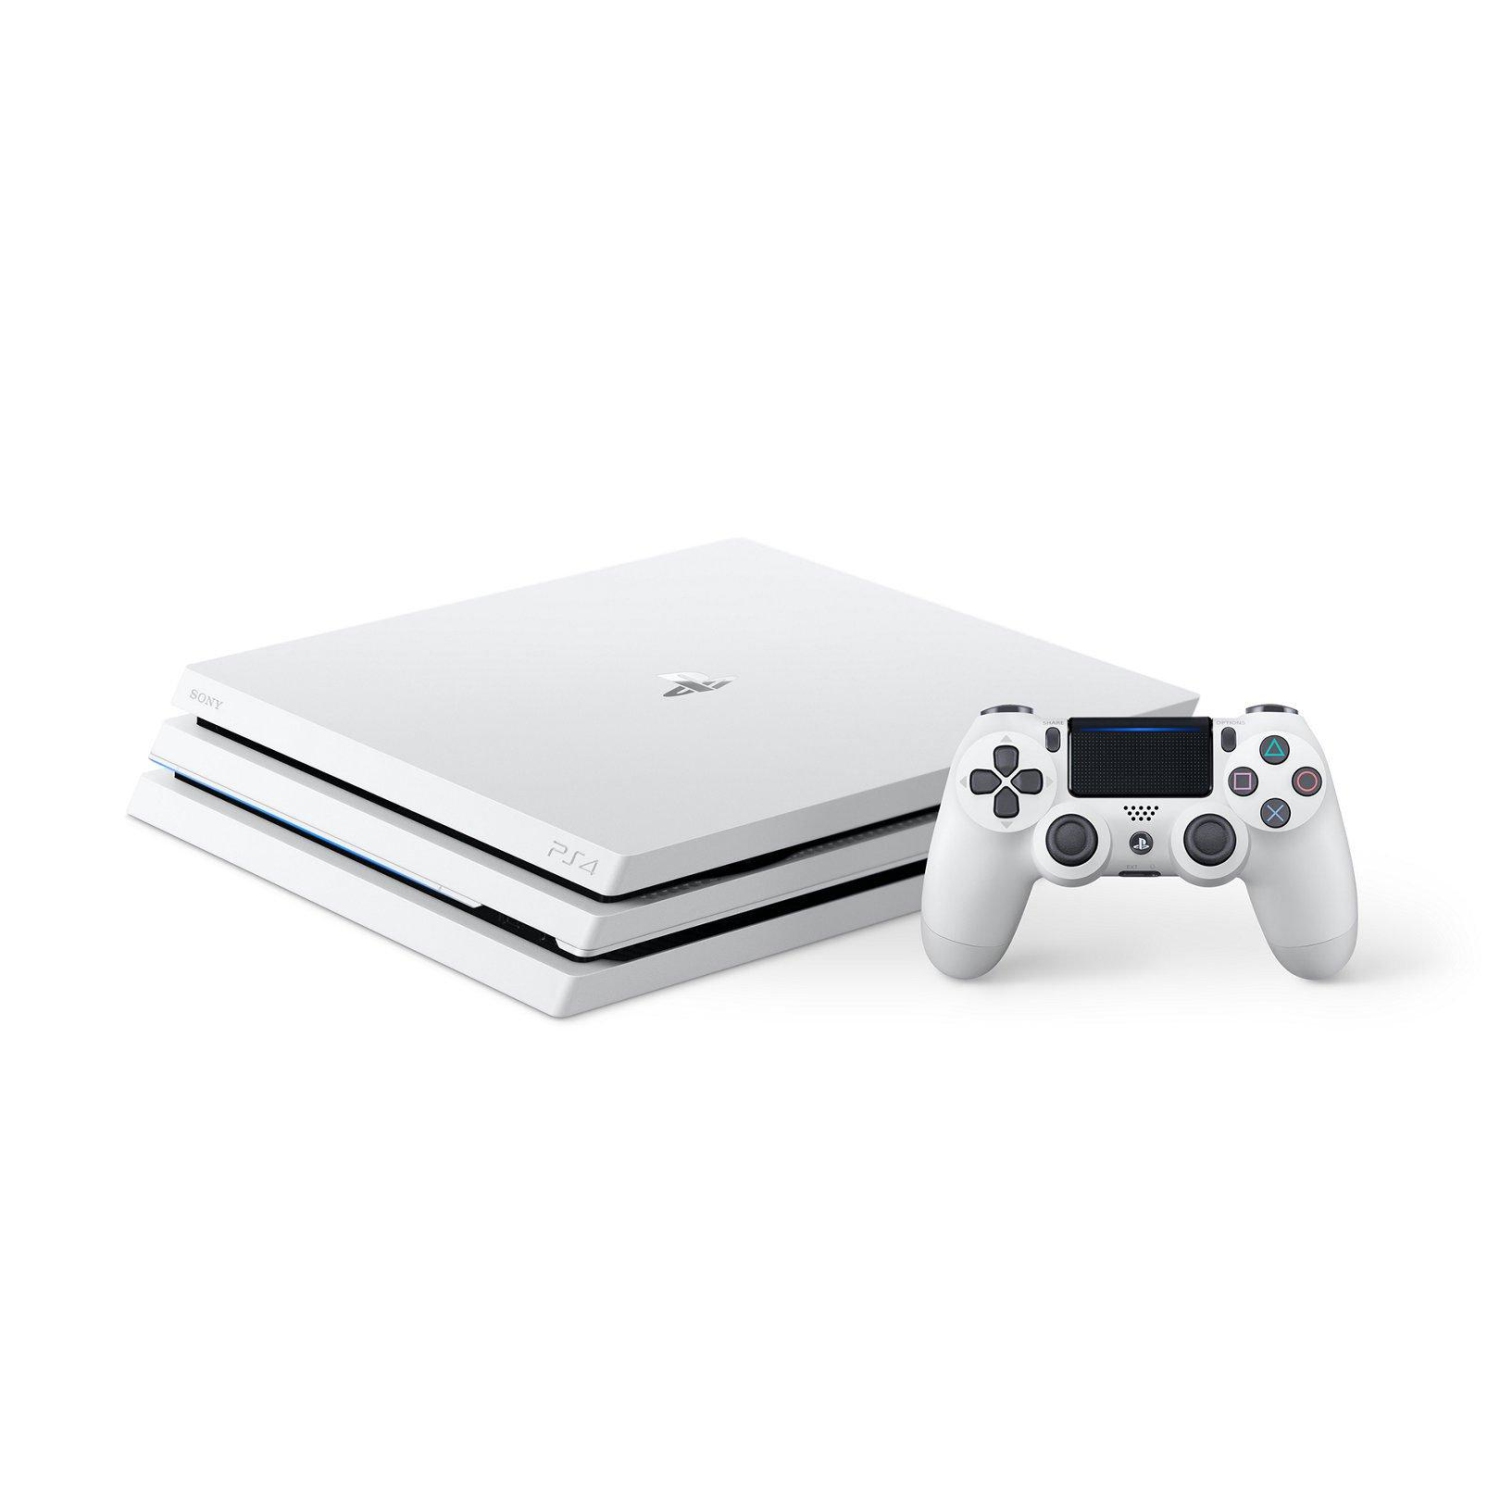 Refurbished (Good) - Sony PlayStation 4 PS4 Pro 1TB Console (Glacier White)